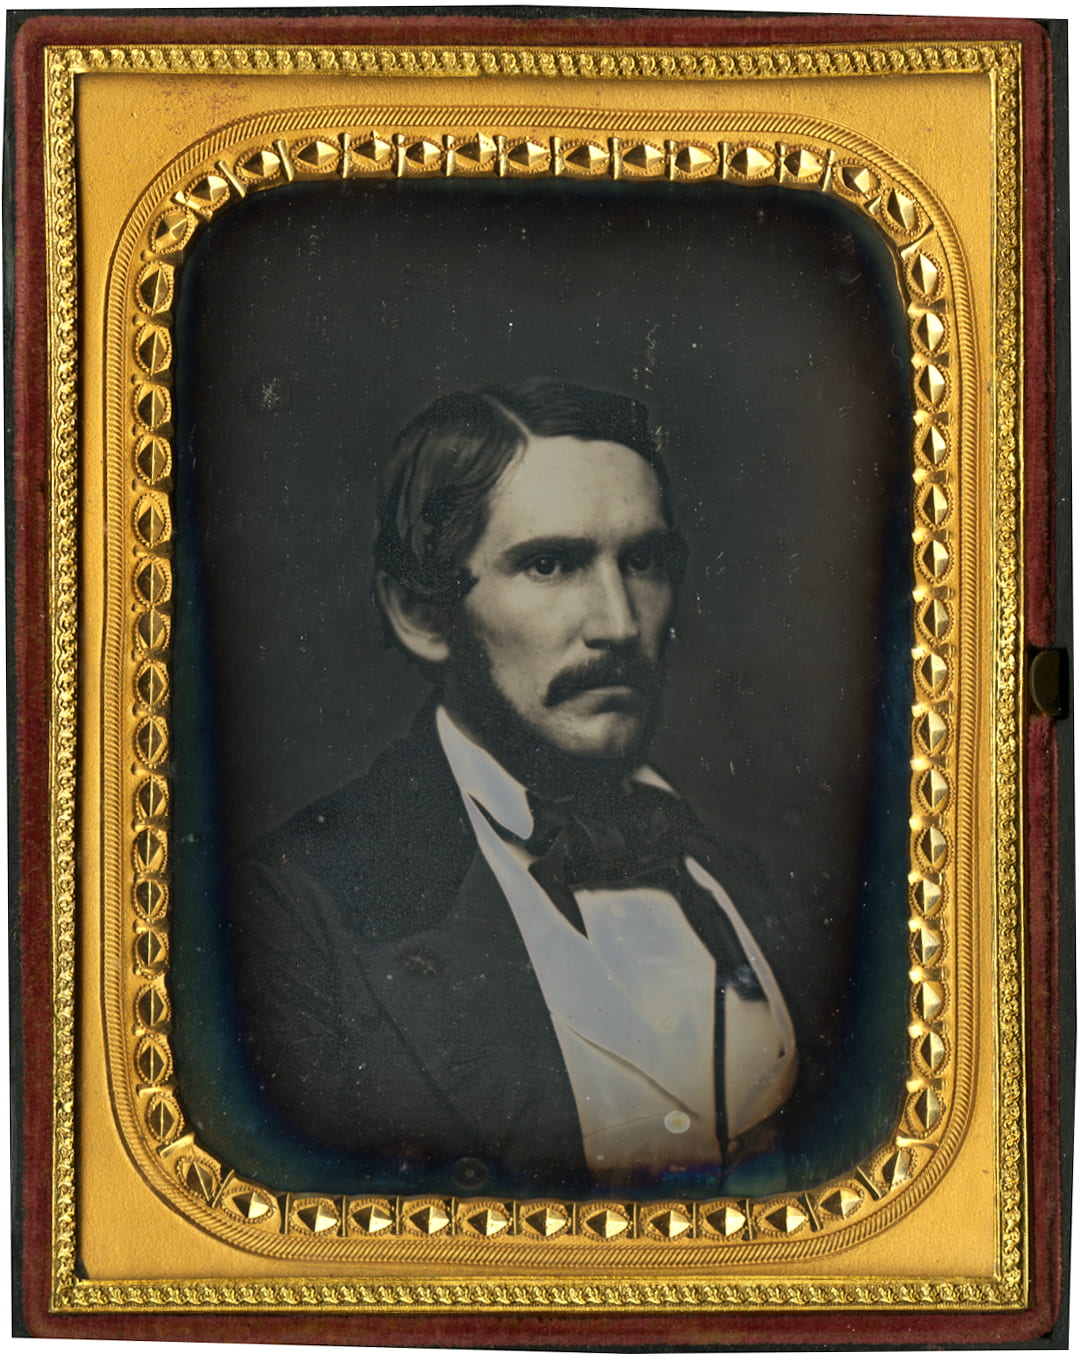 A third cased image of Sam Bowles III, this time ca. 1856.